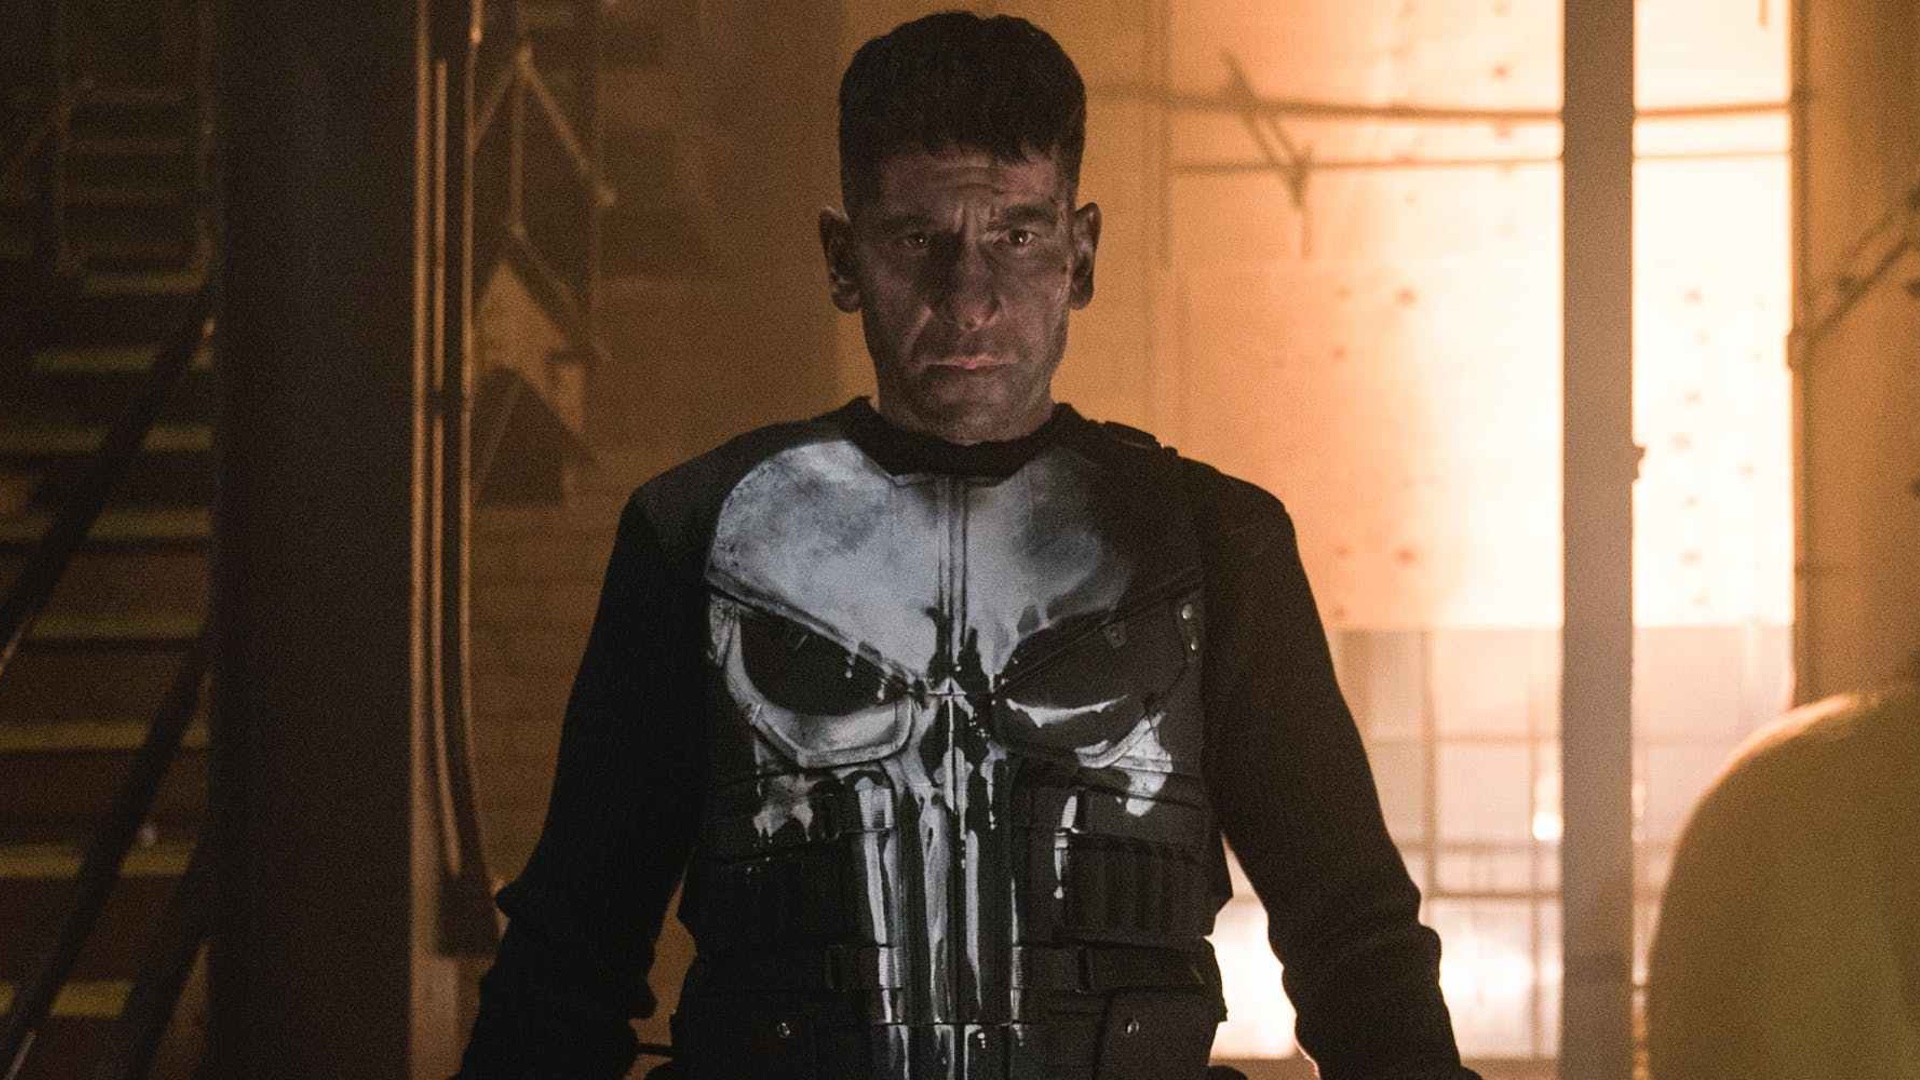 Co-Creator Of The Punisher Doesn’t Think Law Enforcement Should Embrace His Symbol